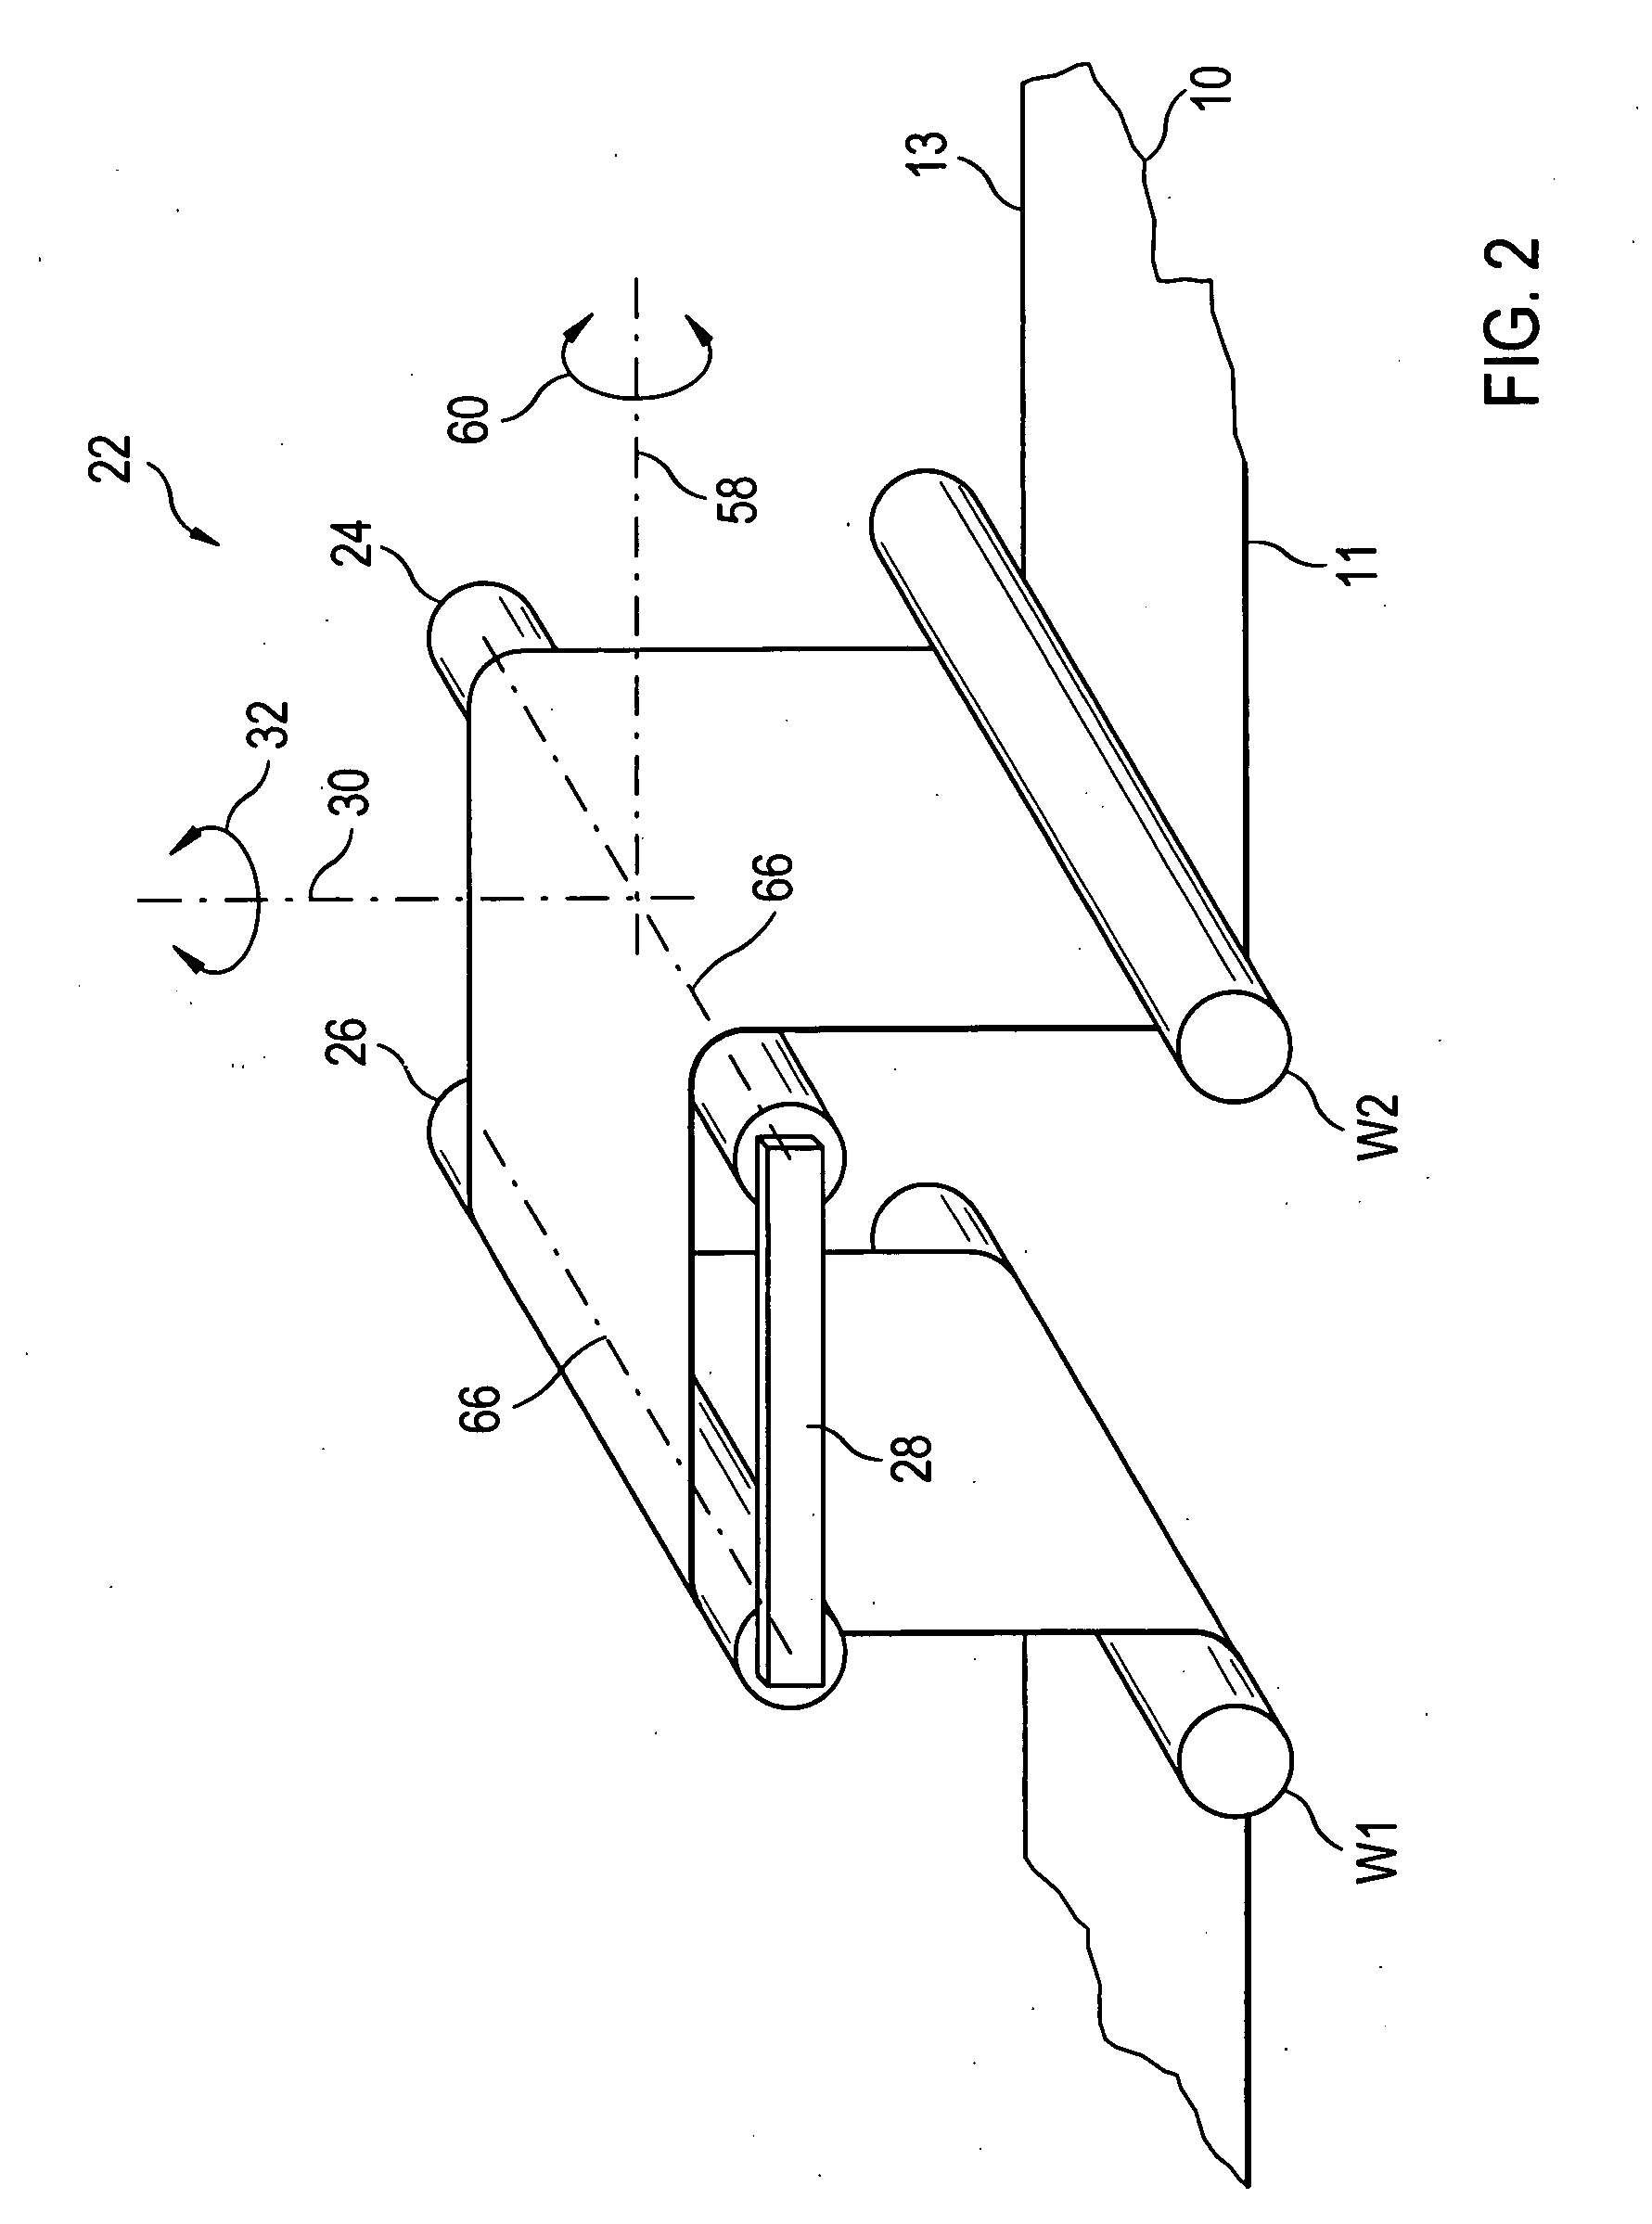 Device and method for controlling the position of the latral edge of a continuous web